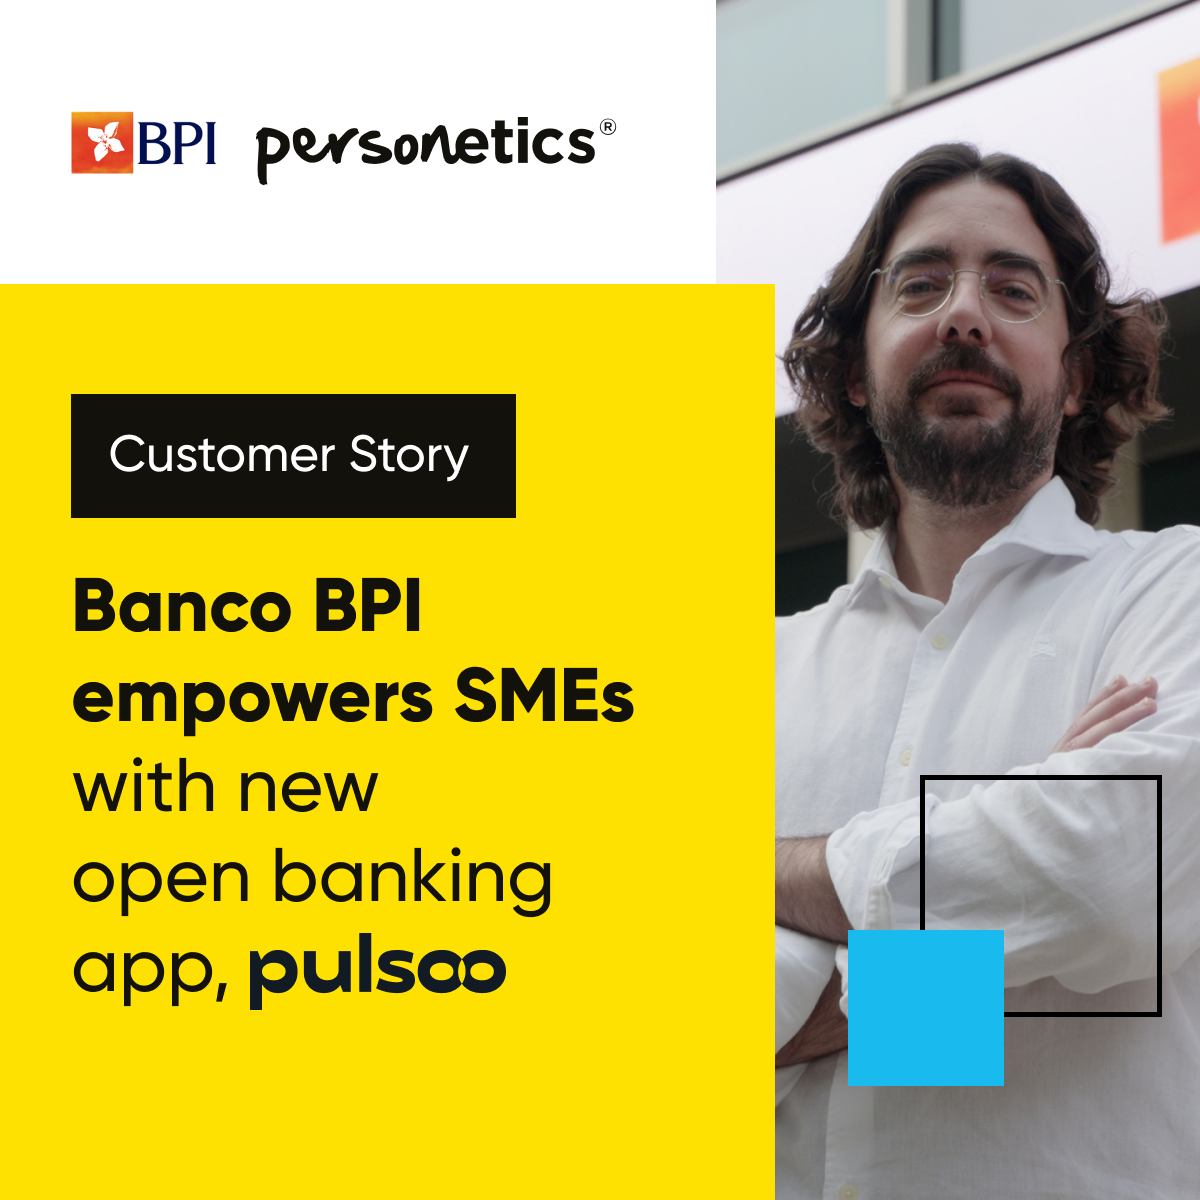 Banco BPI Partners with Personetics to Empower SMEs With New Open-banking app, Pulsoo  